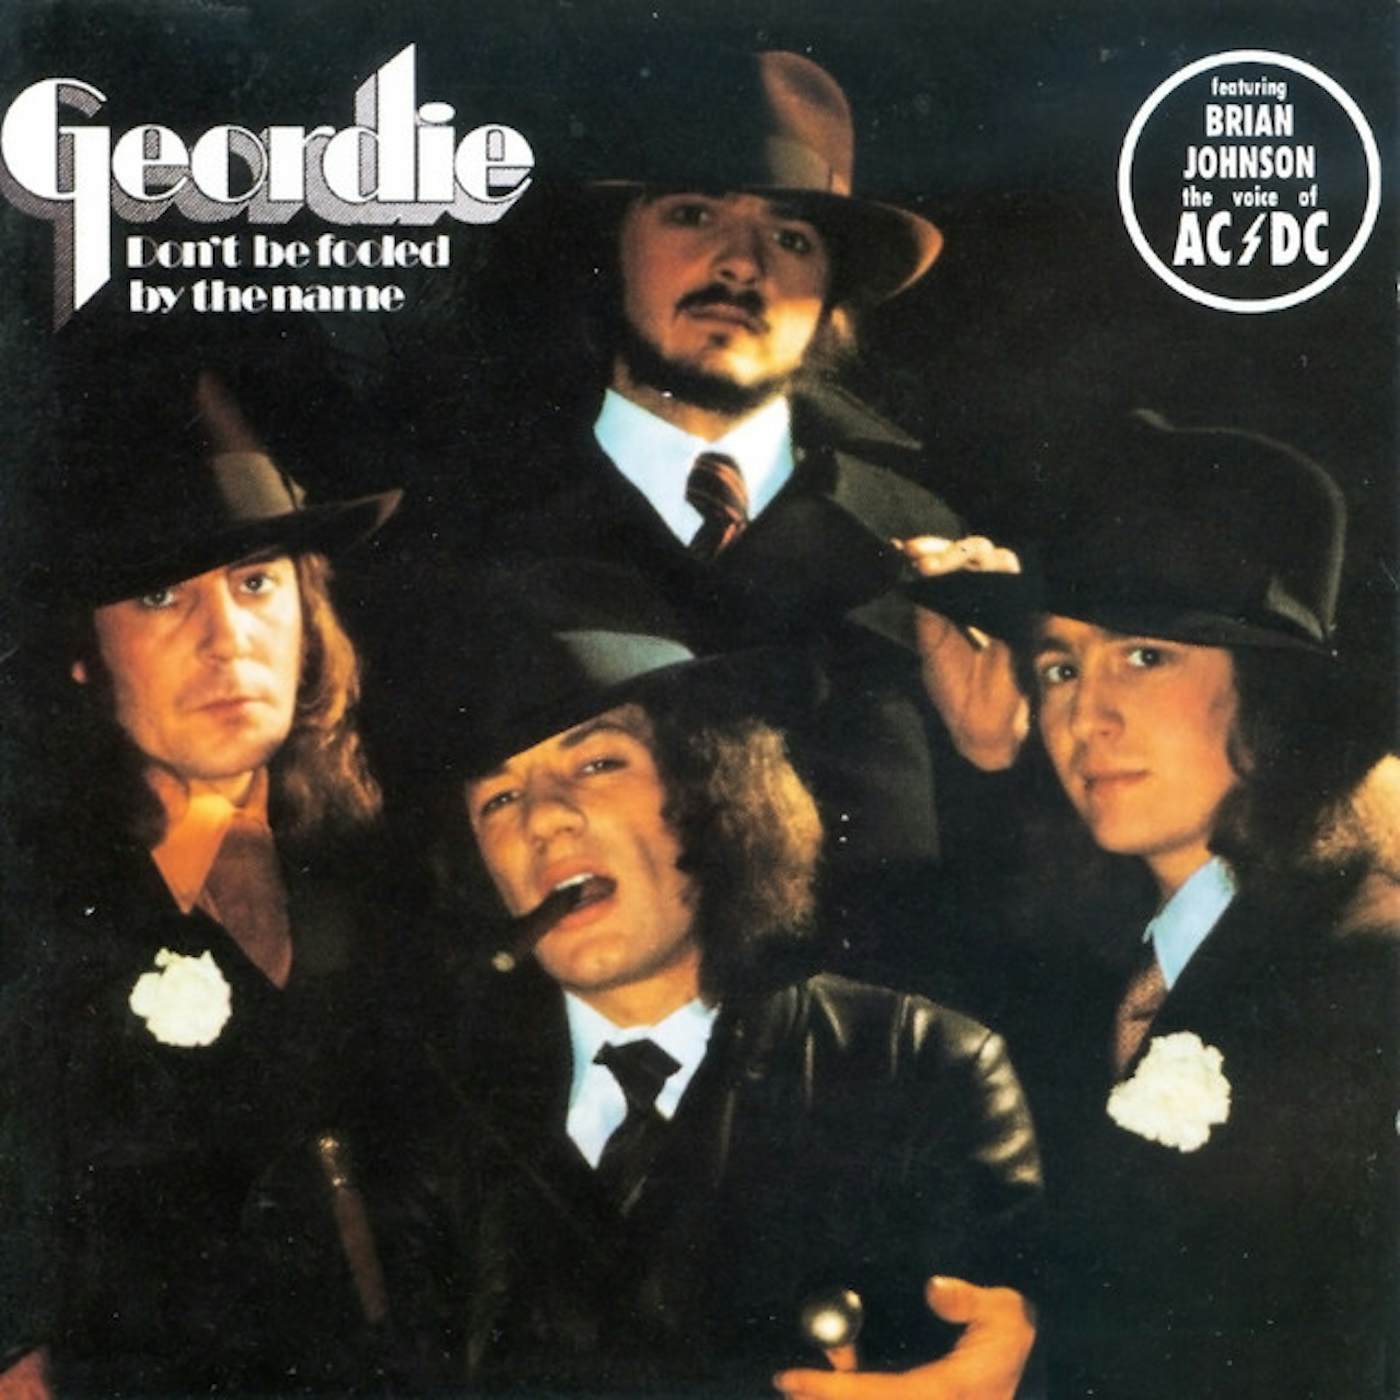 Geordie DON'T BE FOOLED BY THE NAME CD